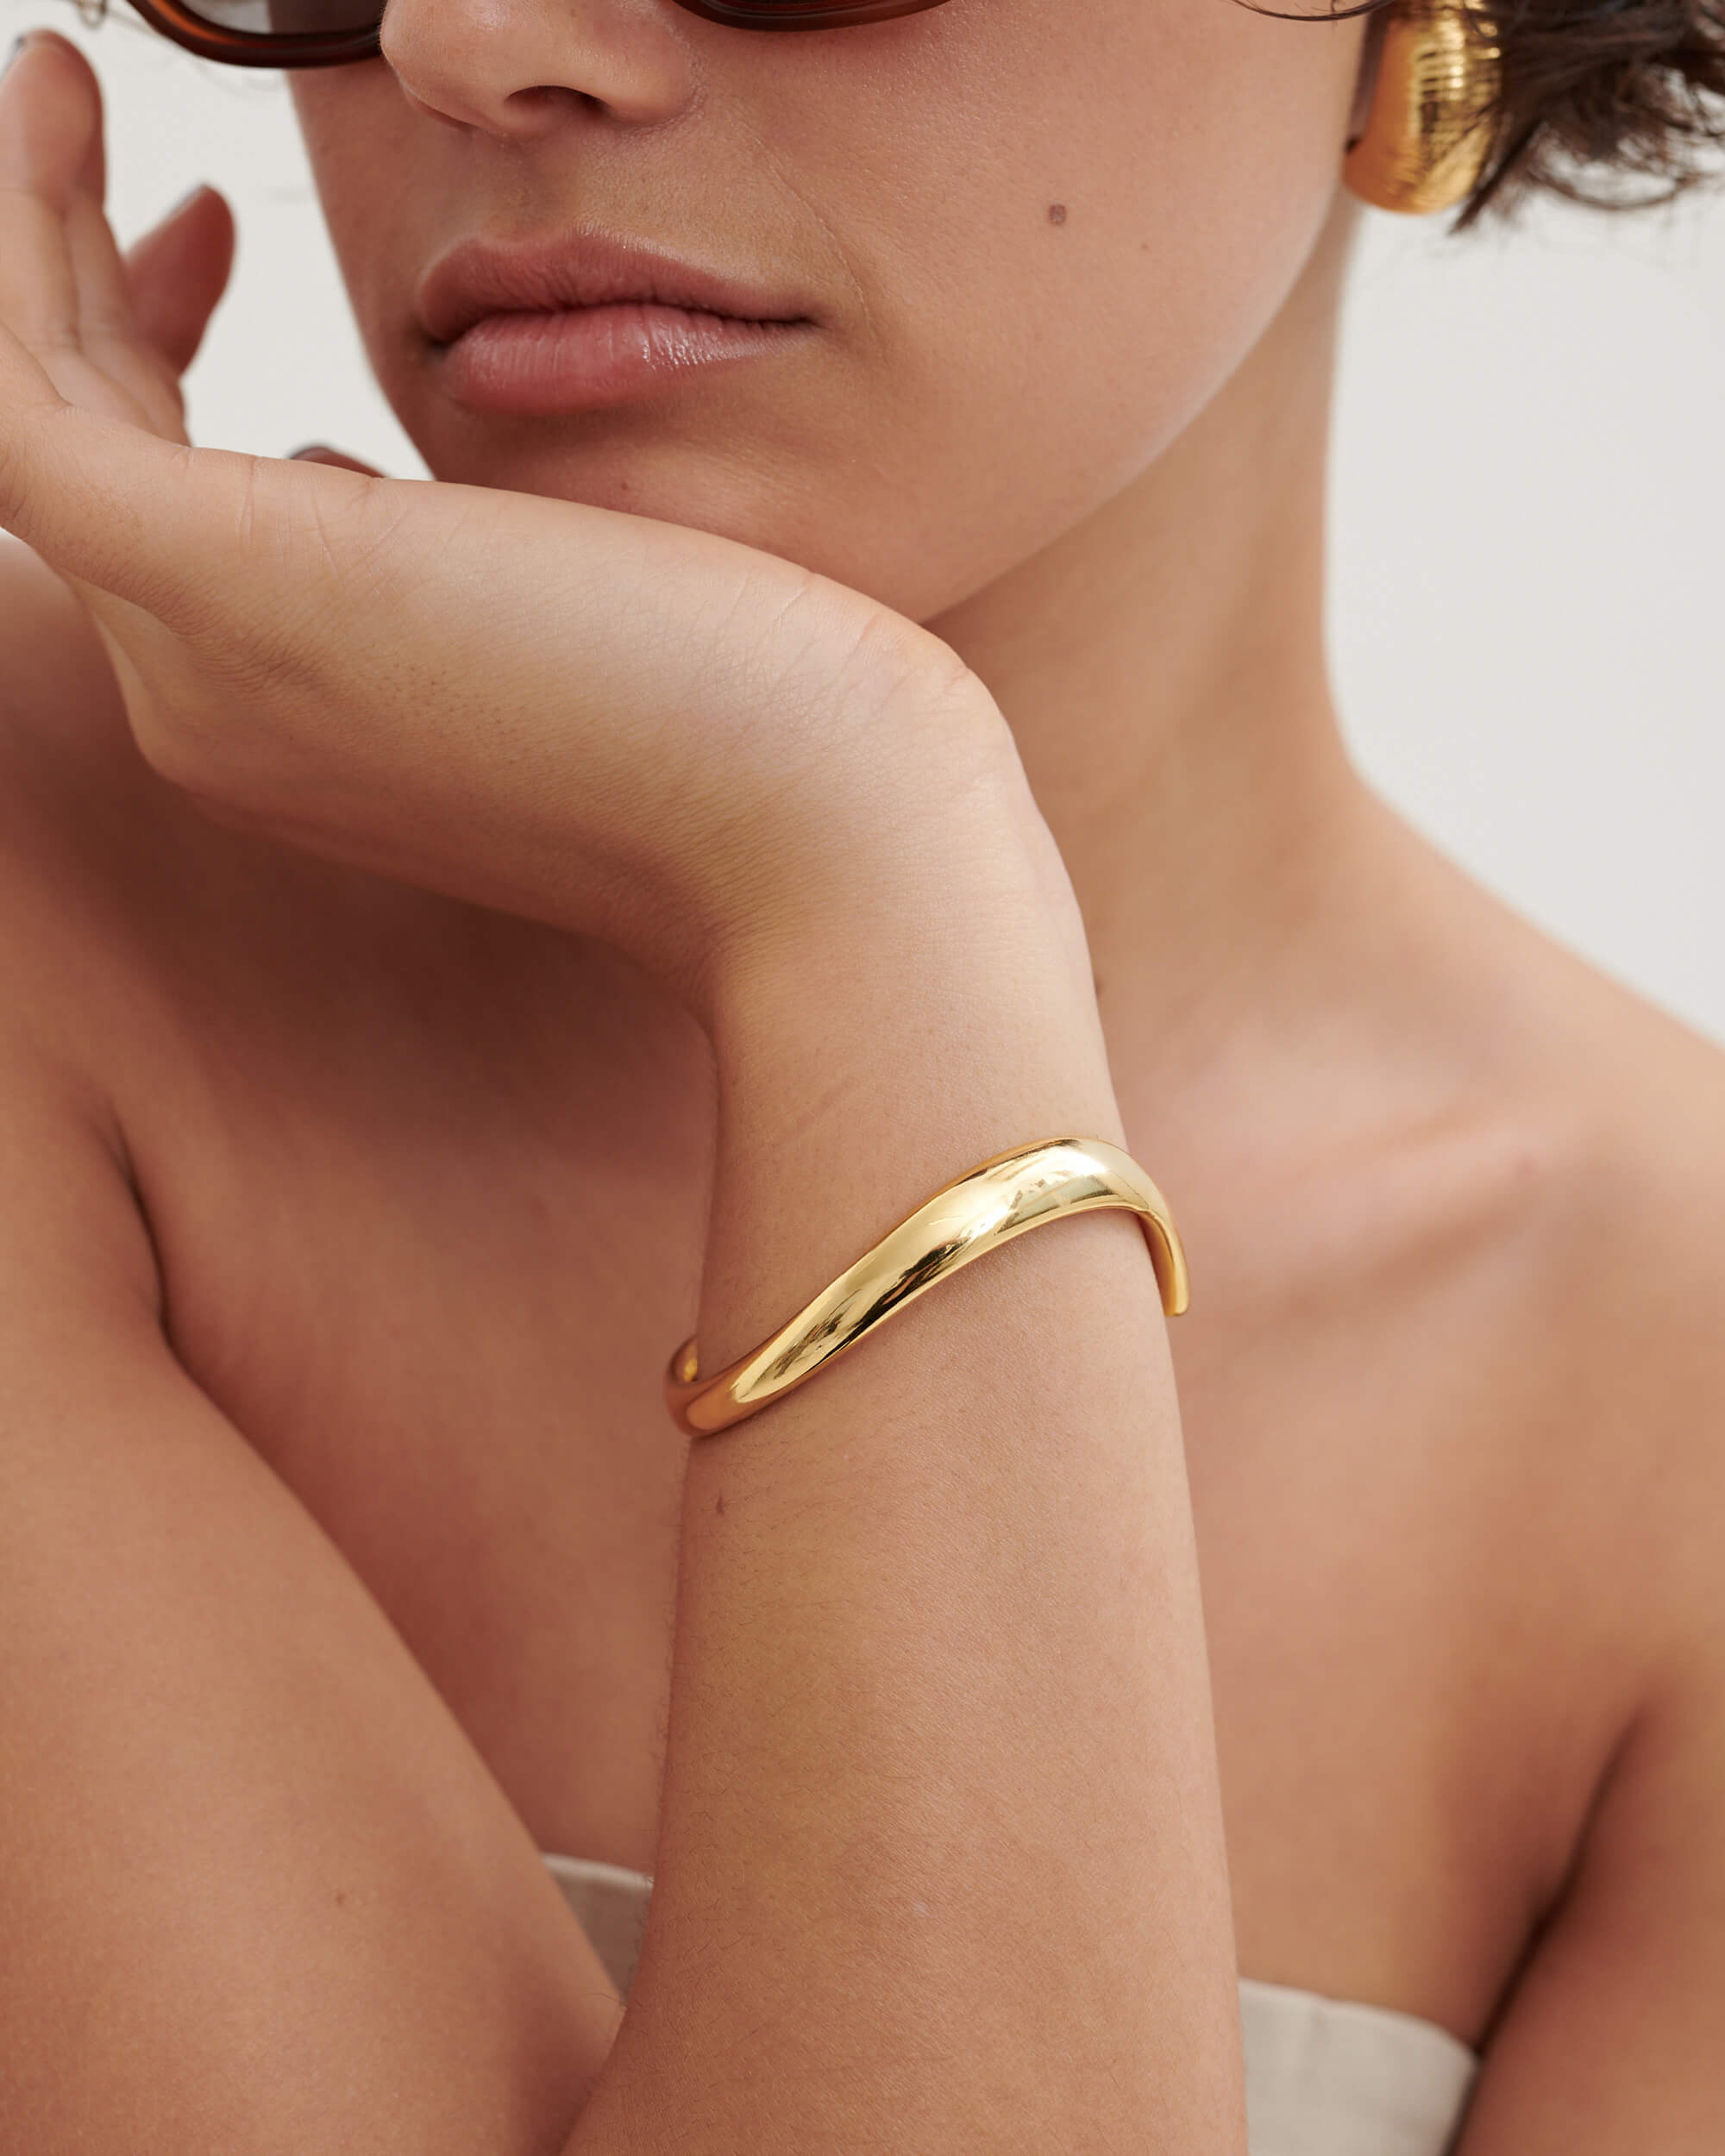 Anna Rossi Everyday Cuff in Gold available at The New Trend Australia.